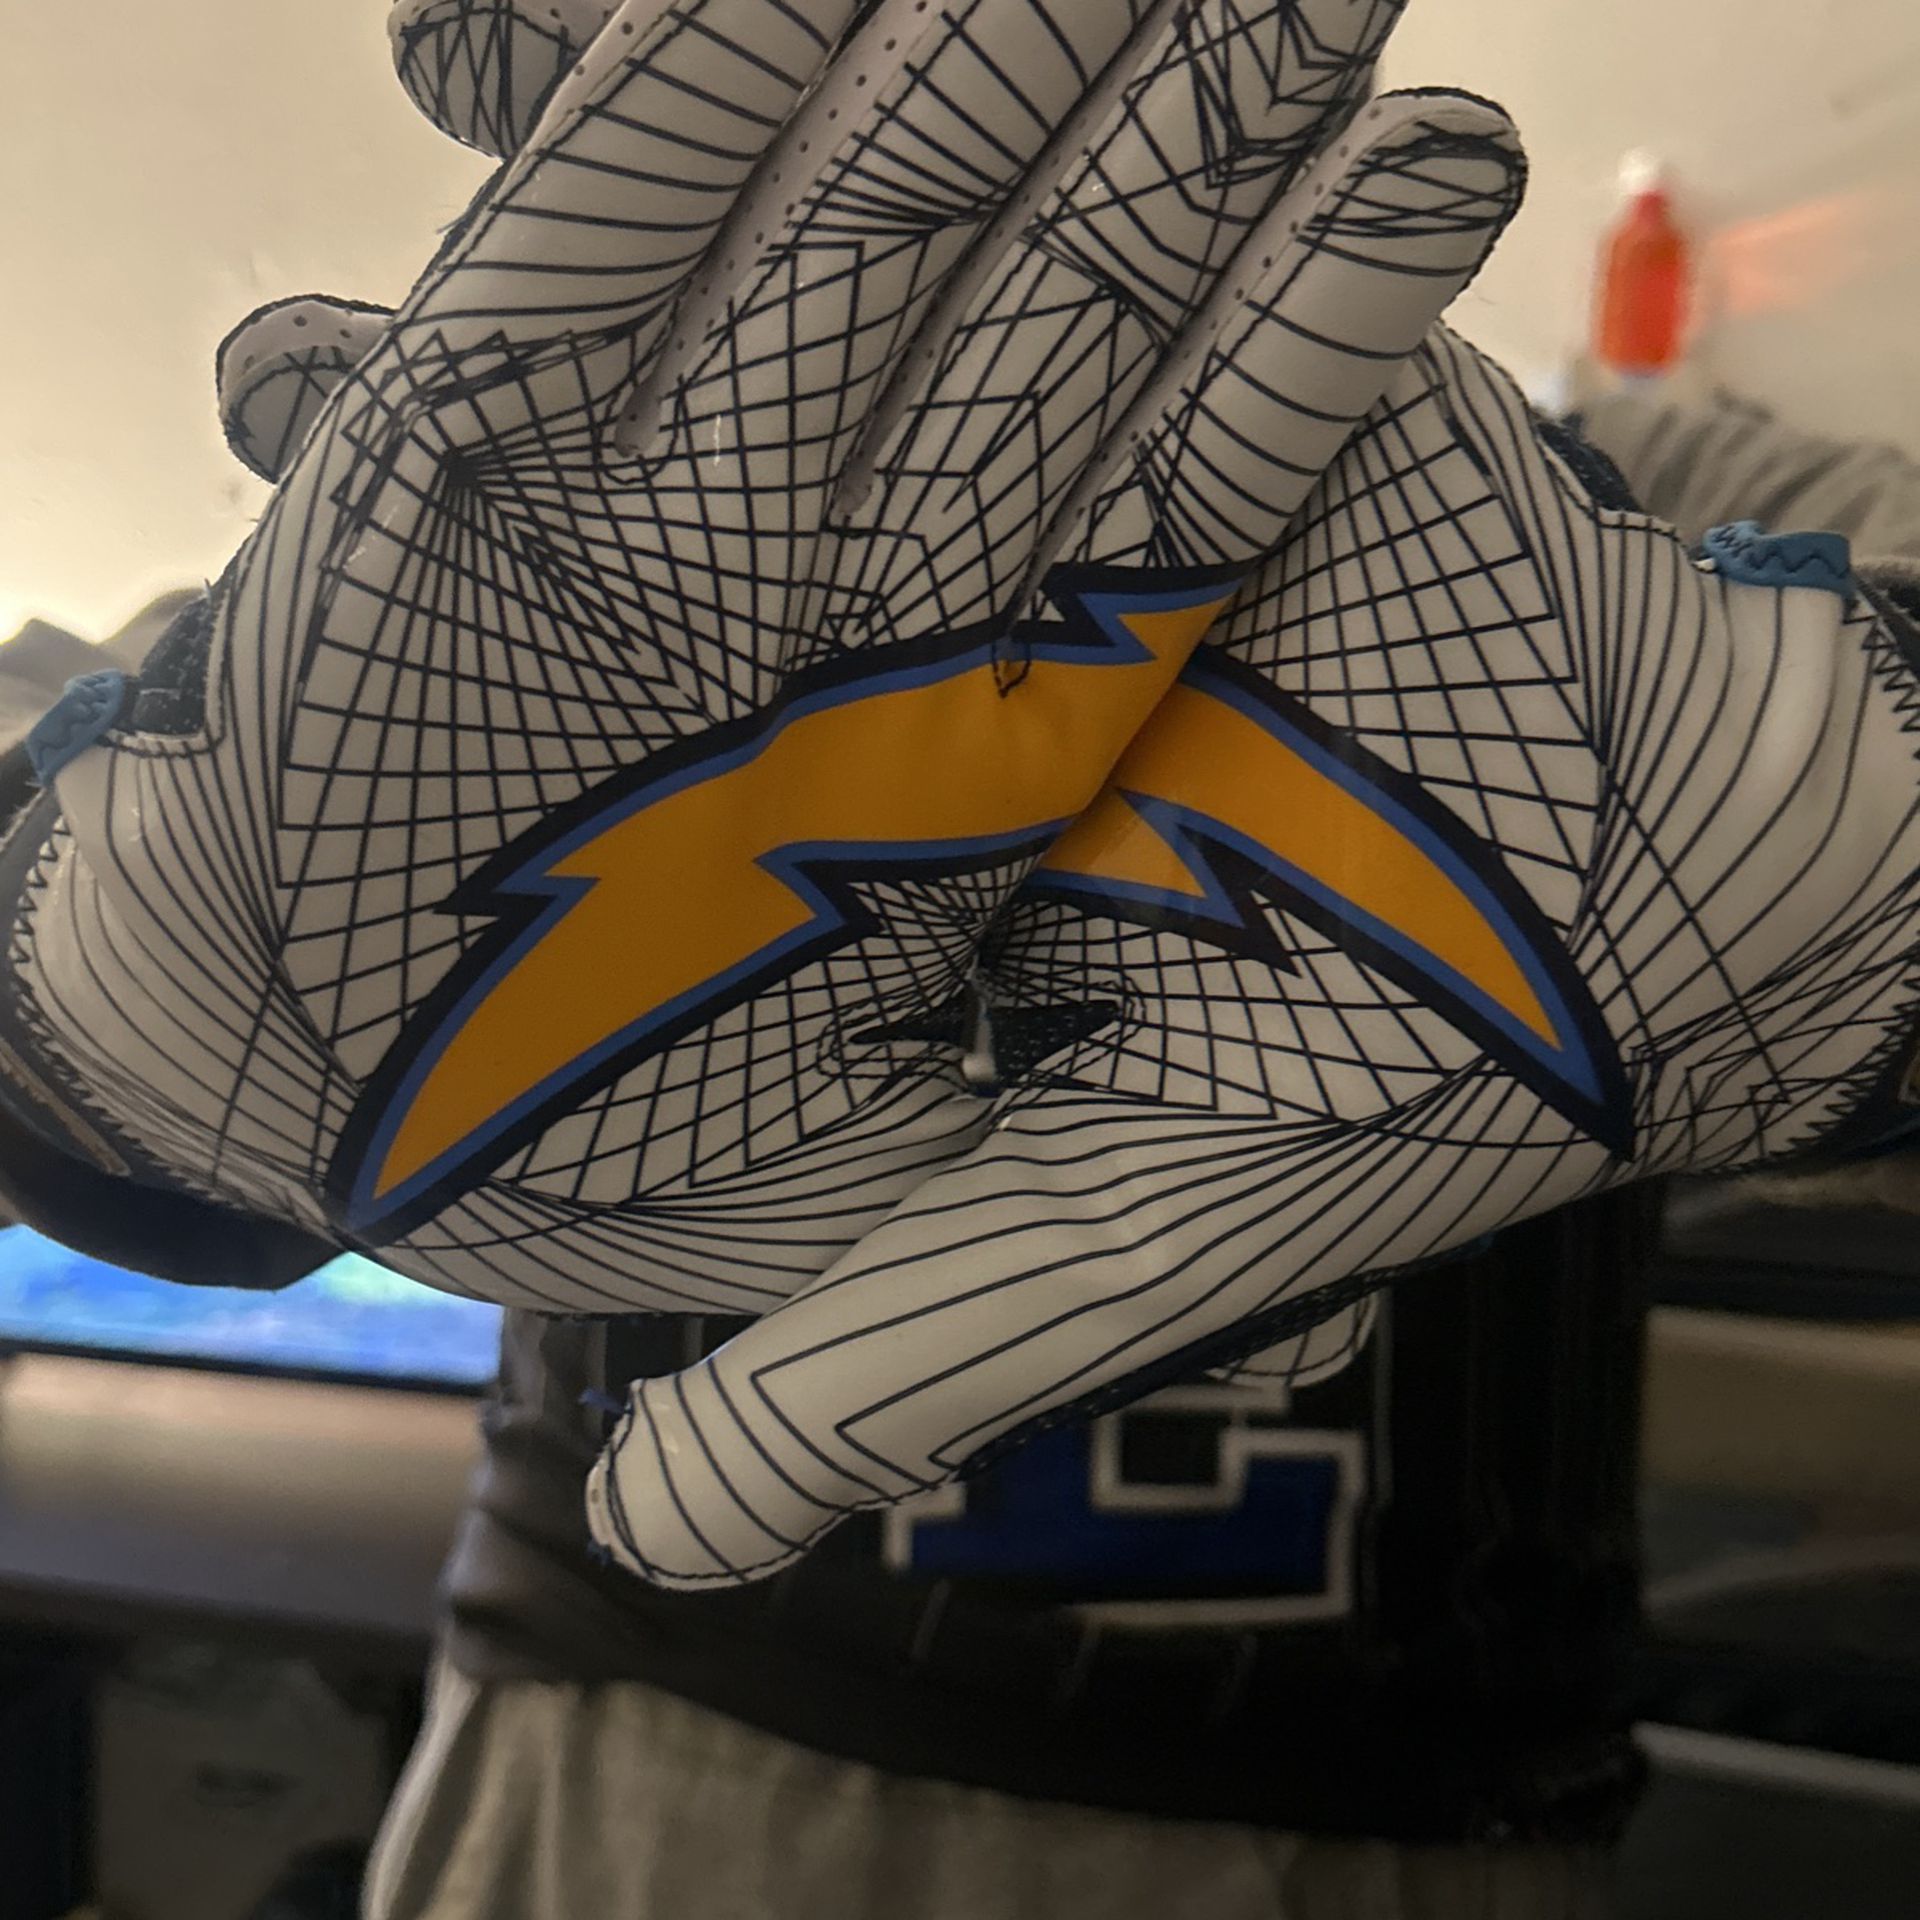 NFL Charger Gloves From Former NFL Player That Played 